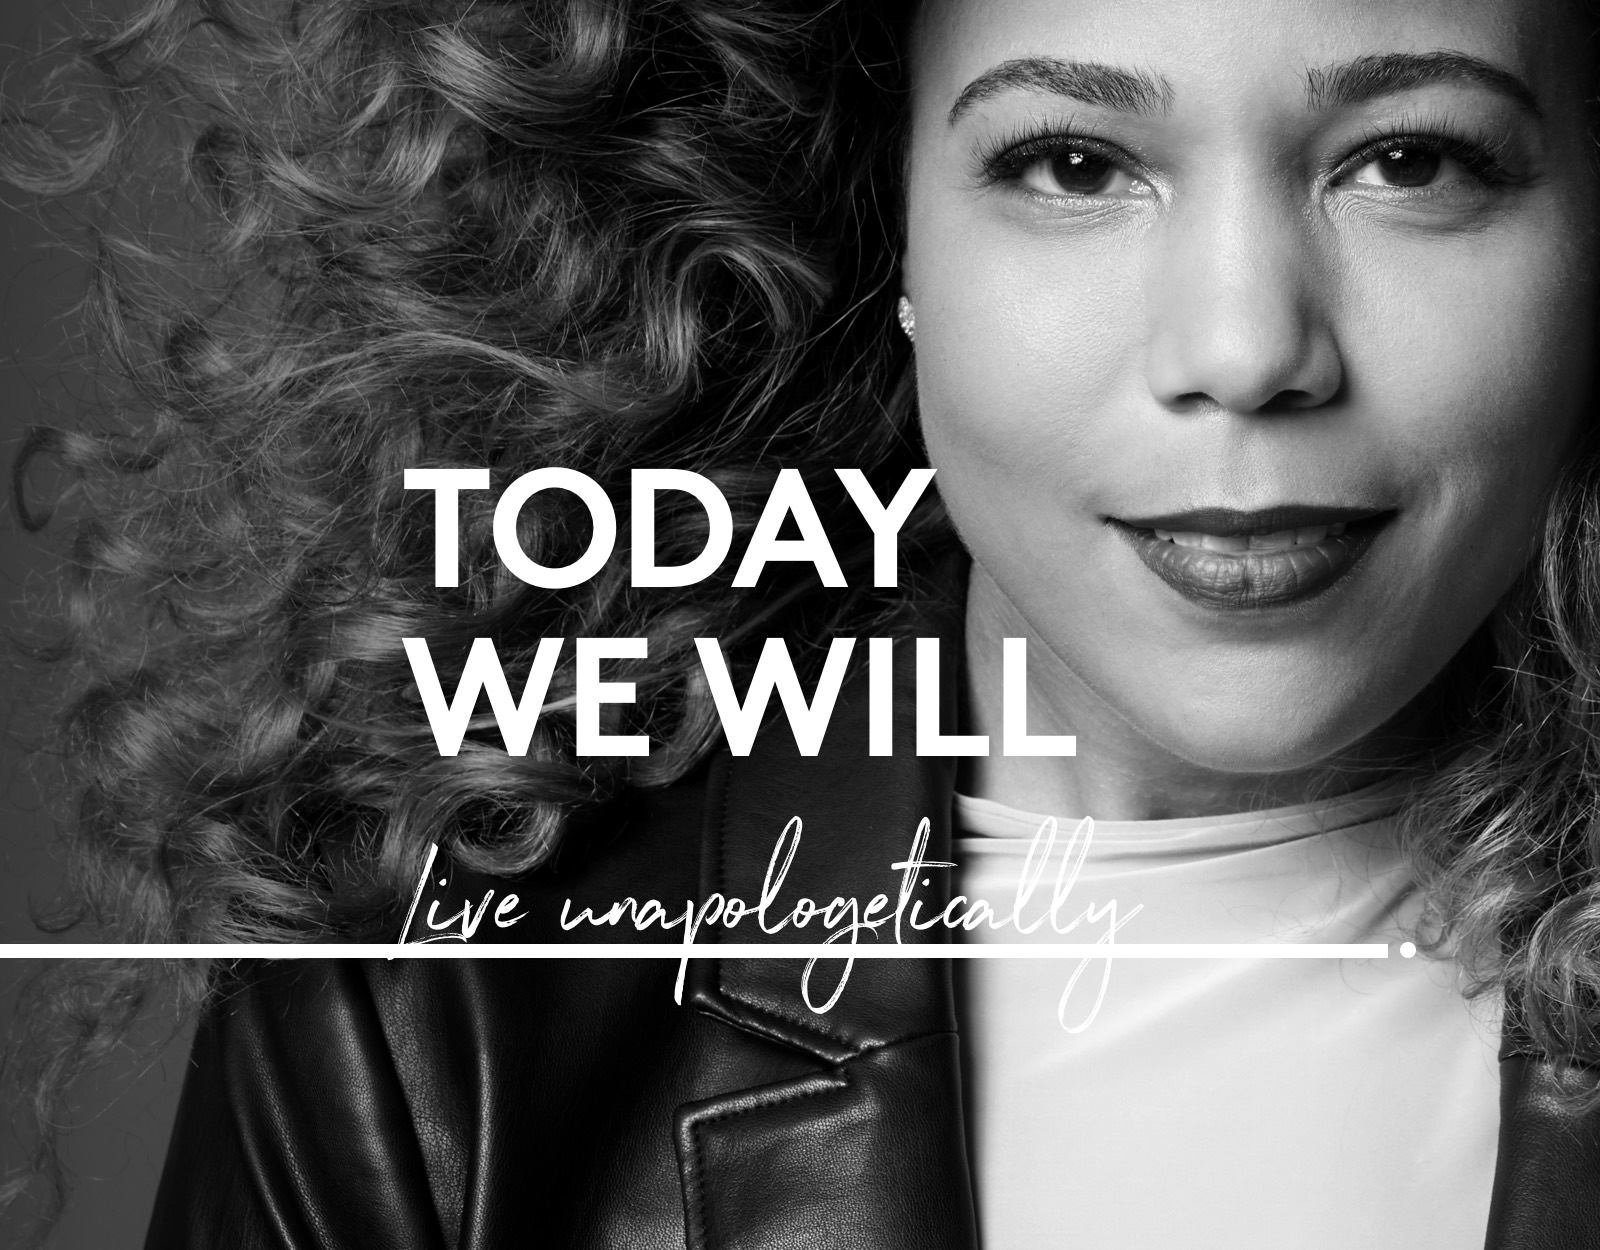 Today We Will Live Unapologetically.